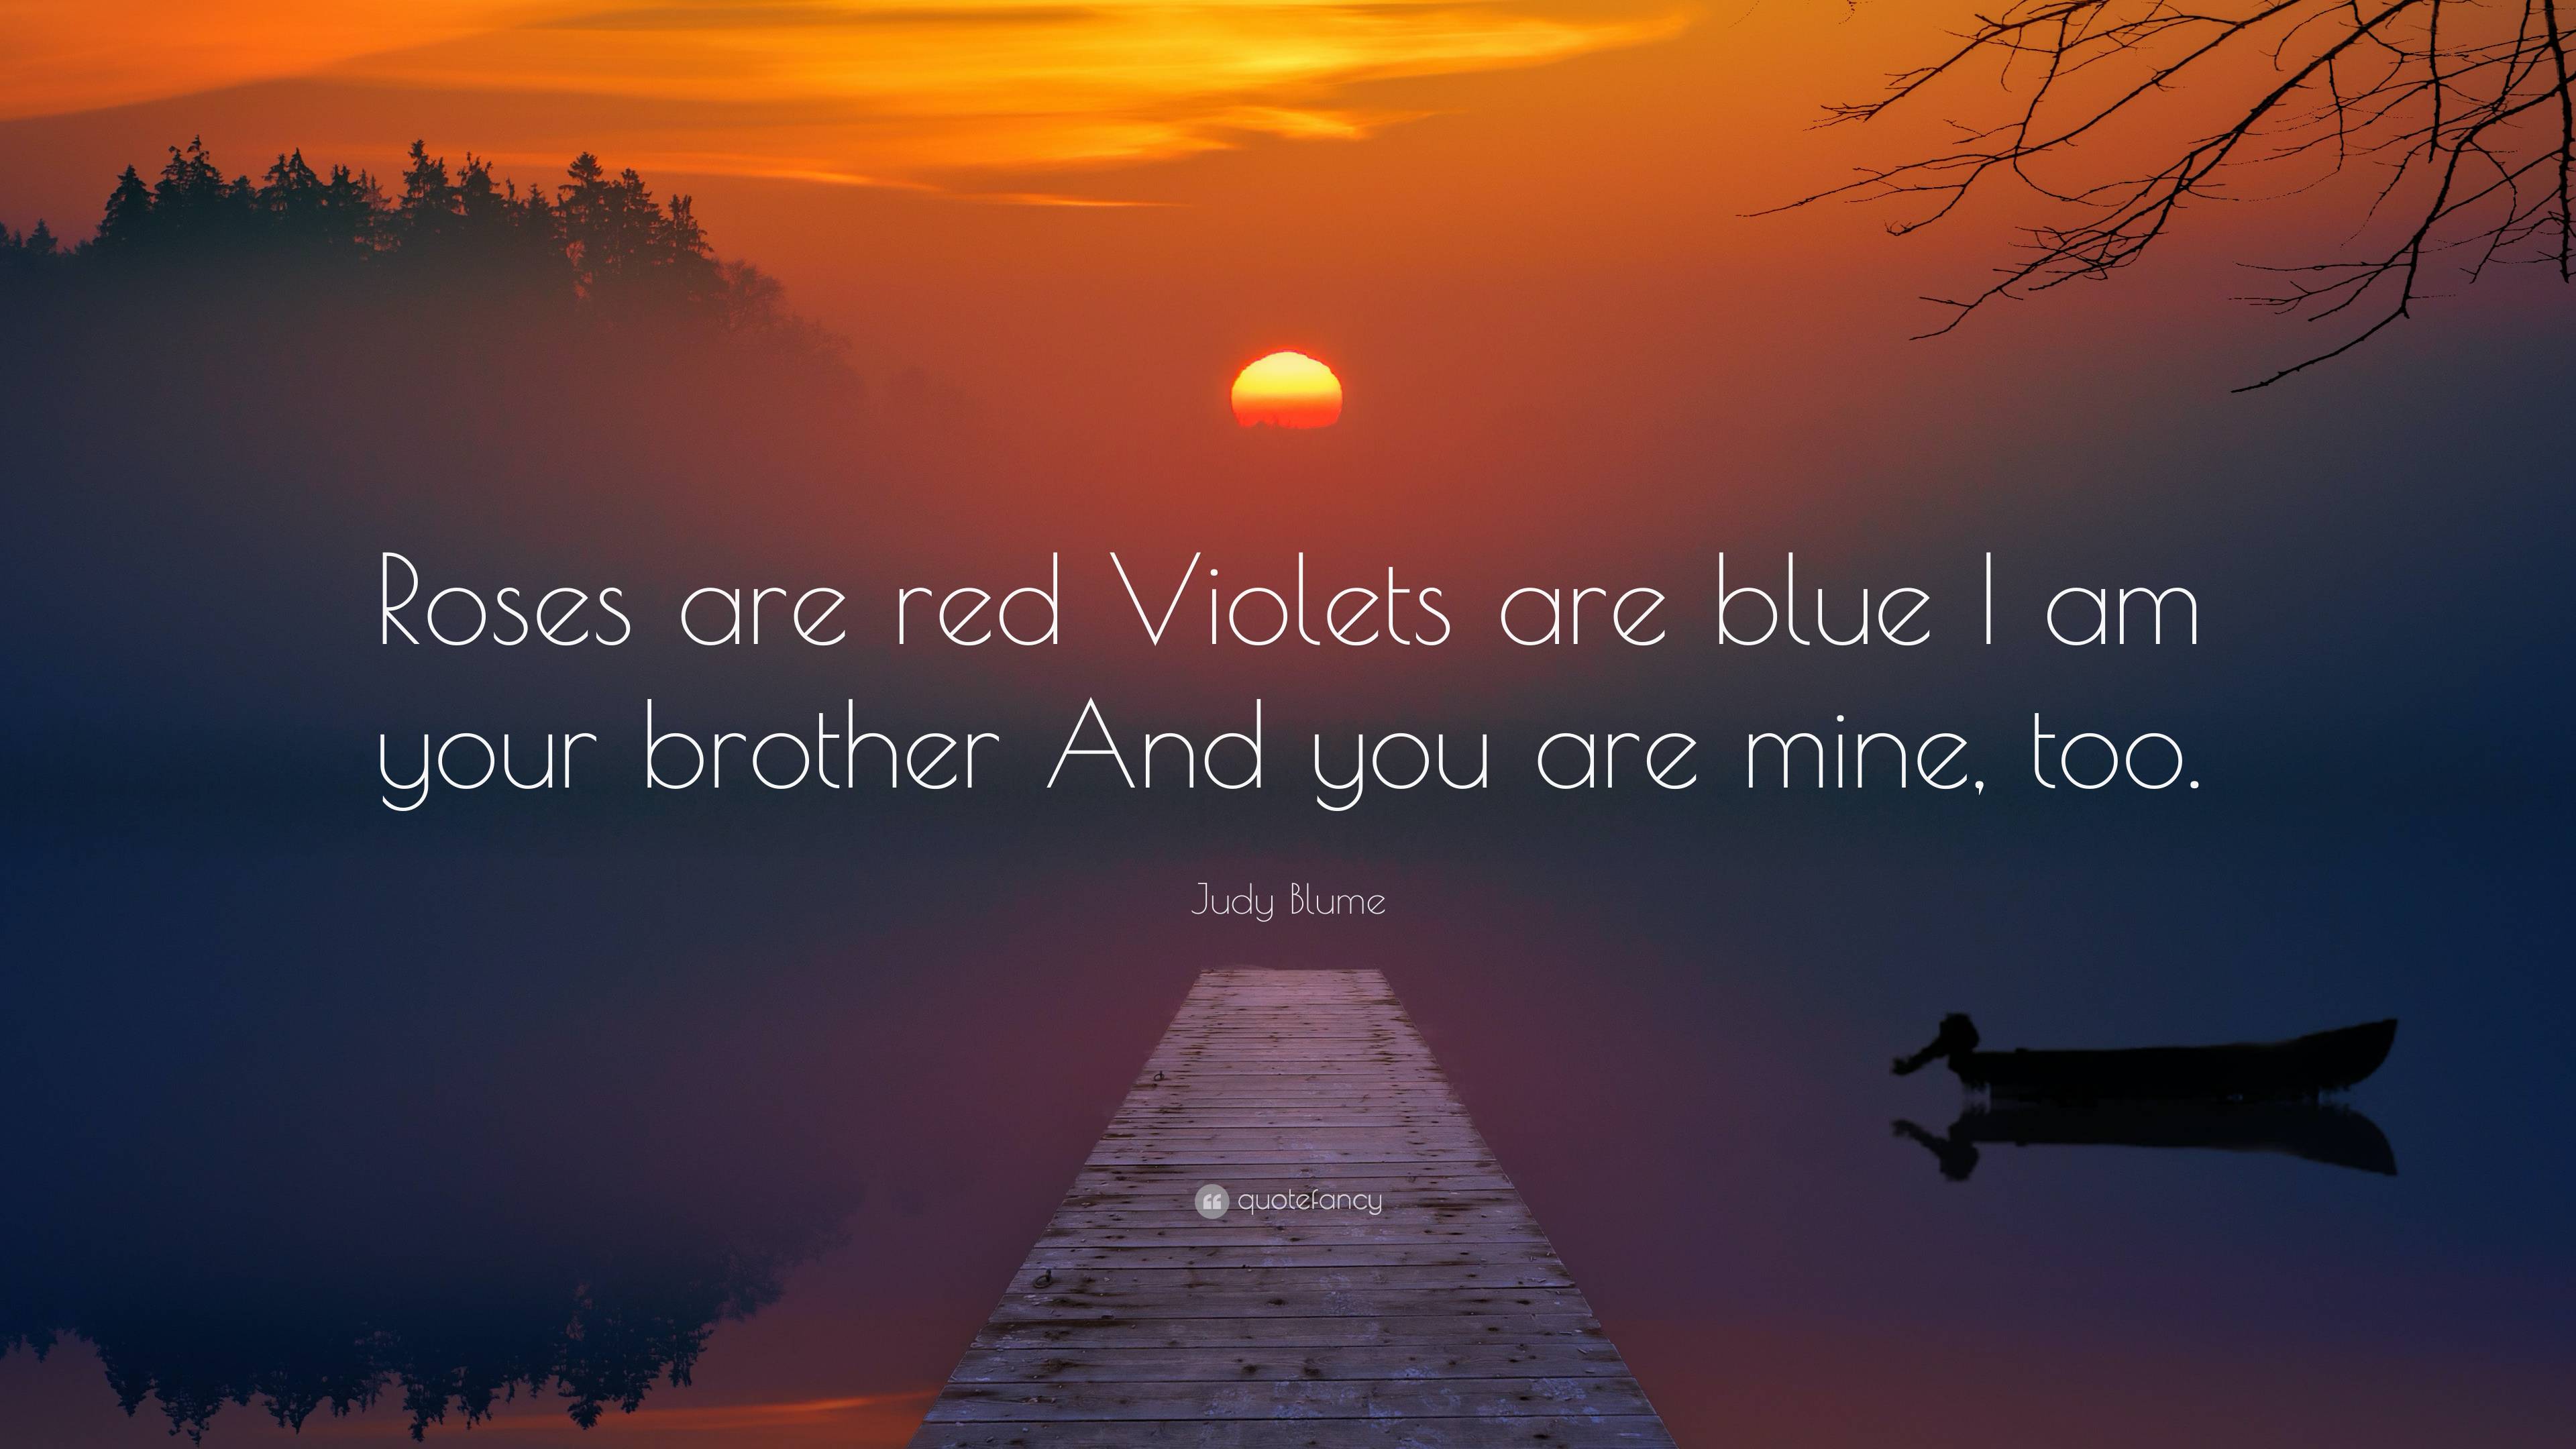 Judy Blume Quote: “Roses are red Violets are blue I am your brother And you are